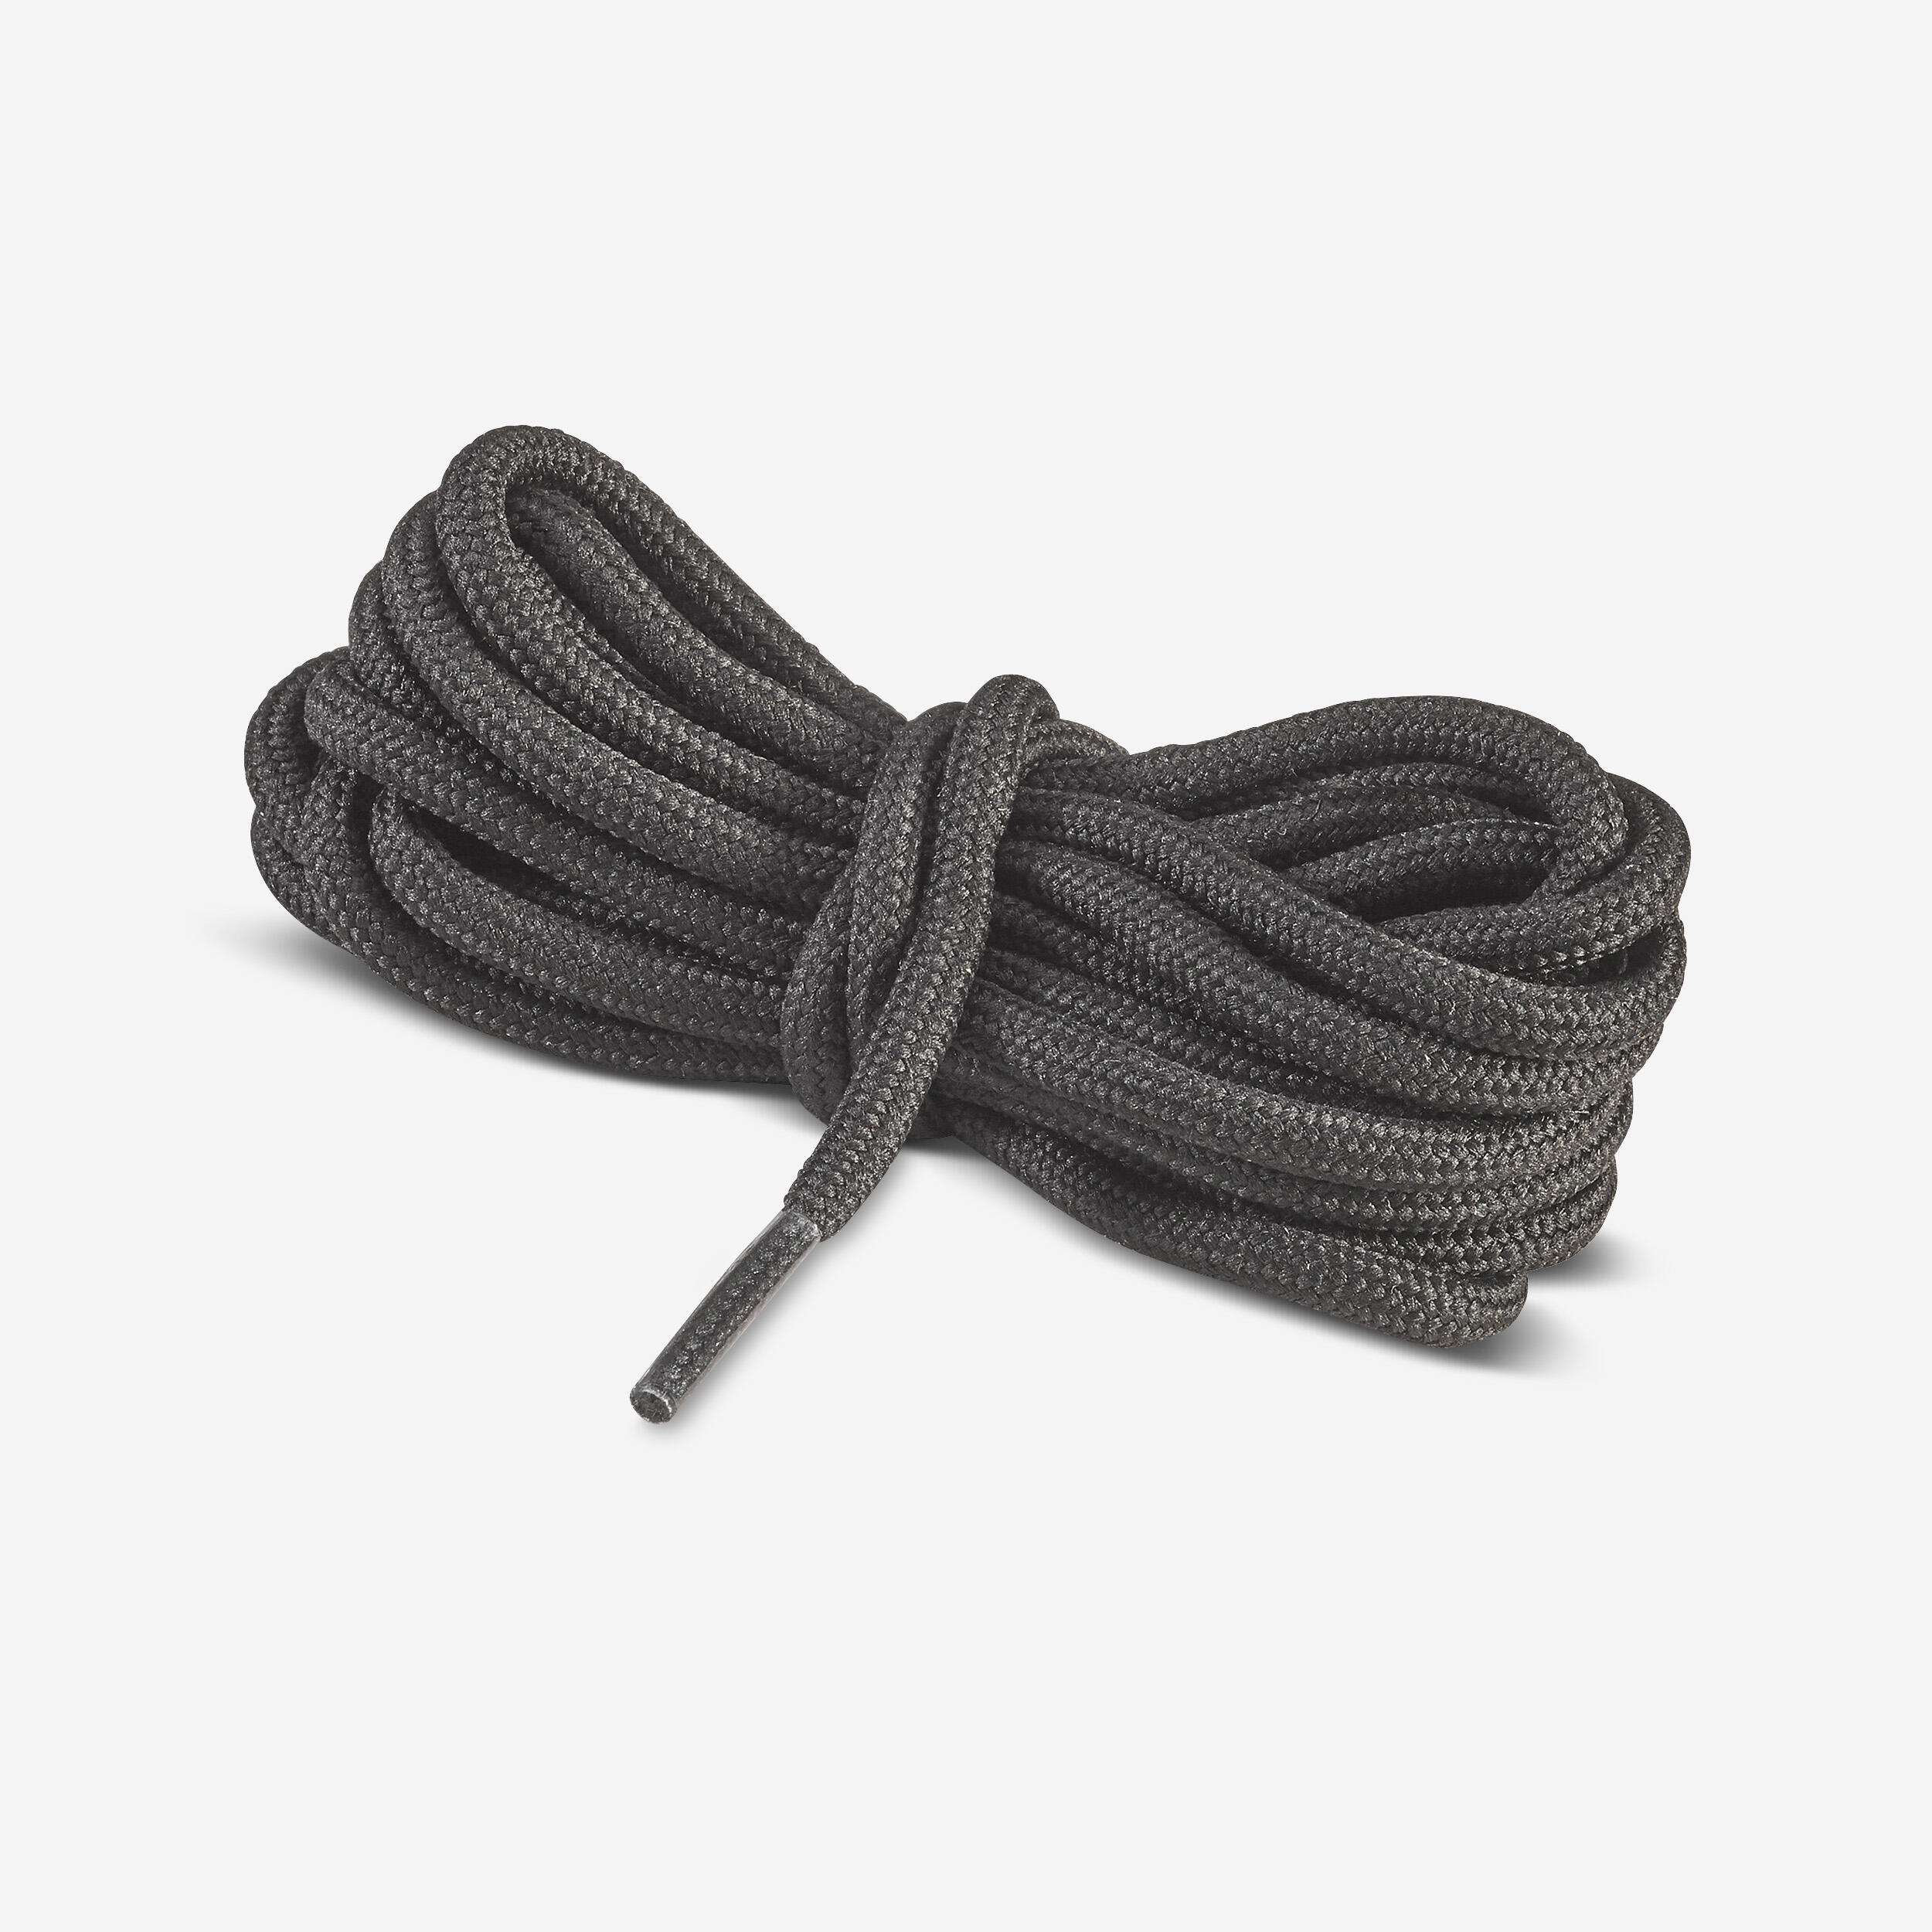 Round laces for hiking shoes 1/4